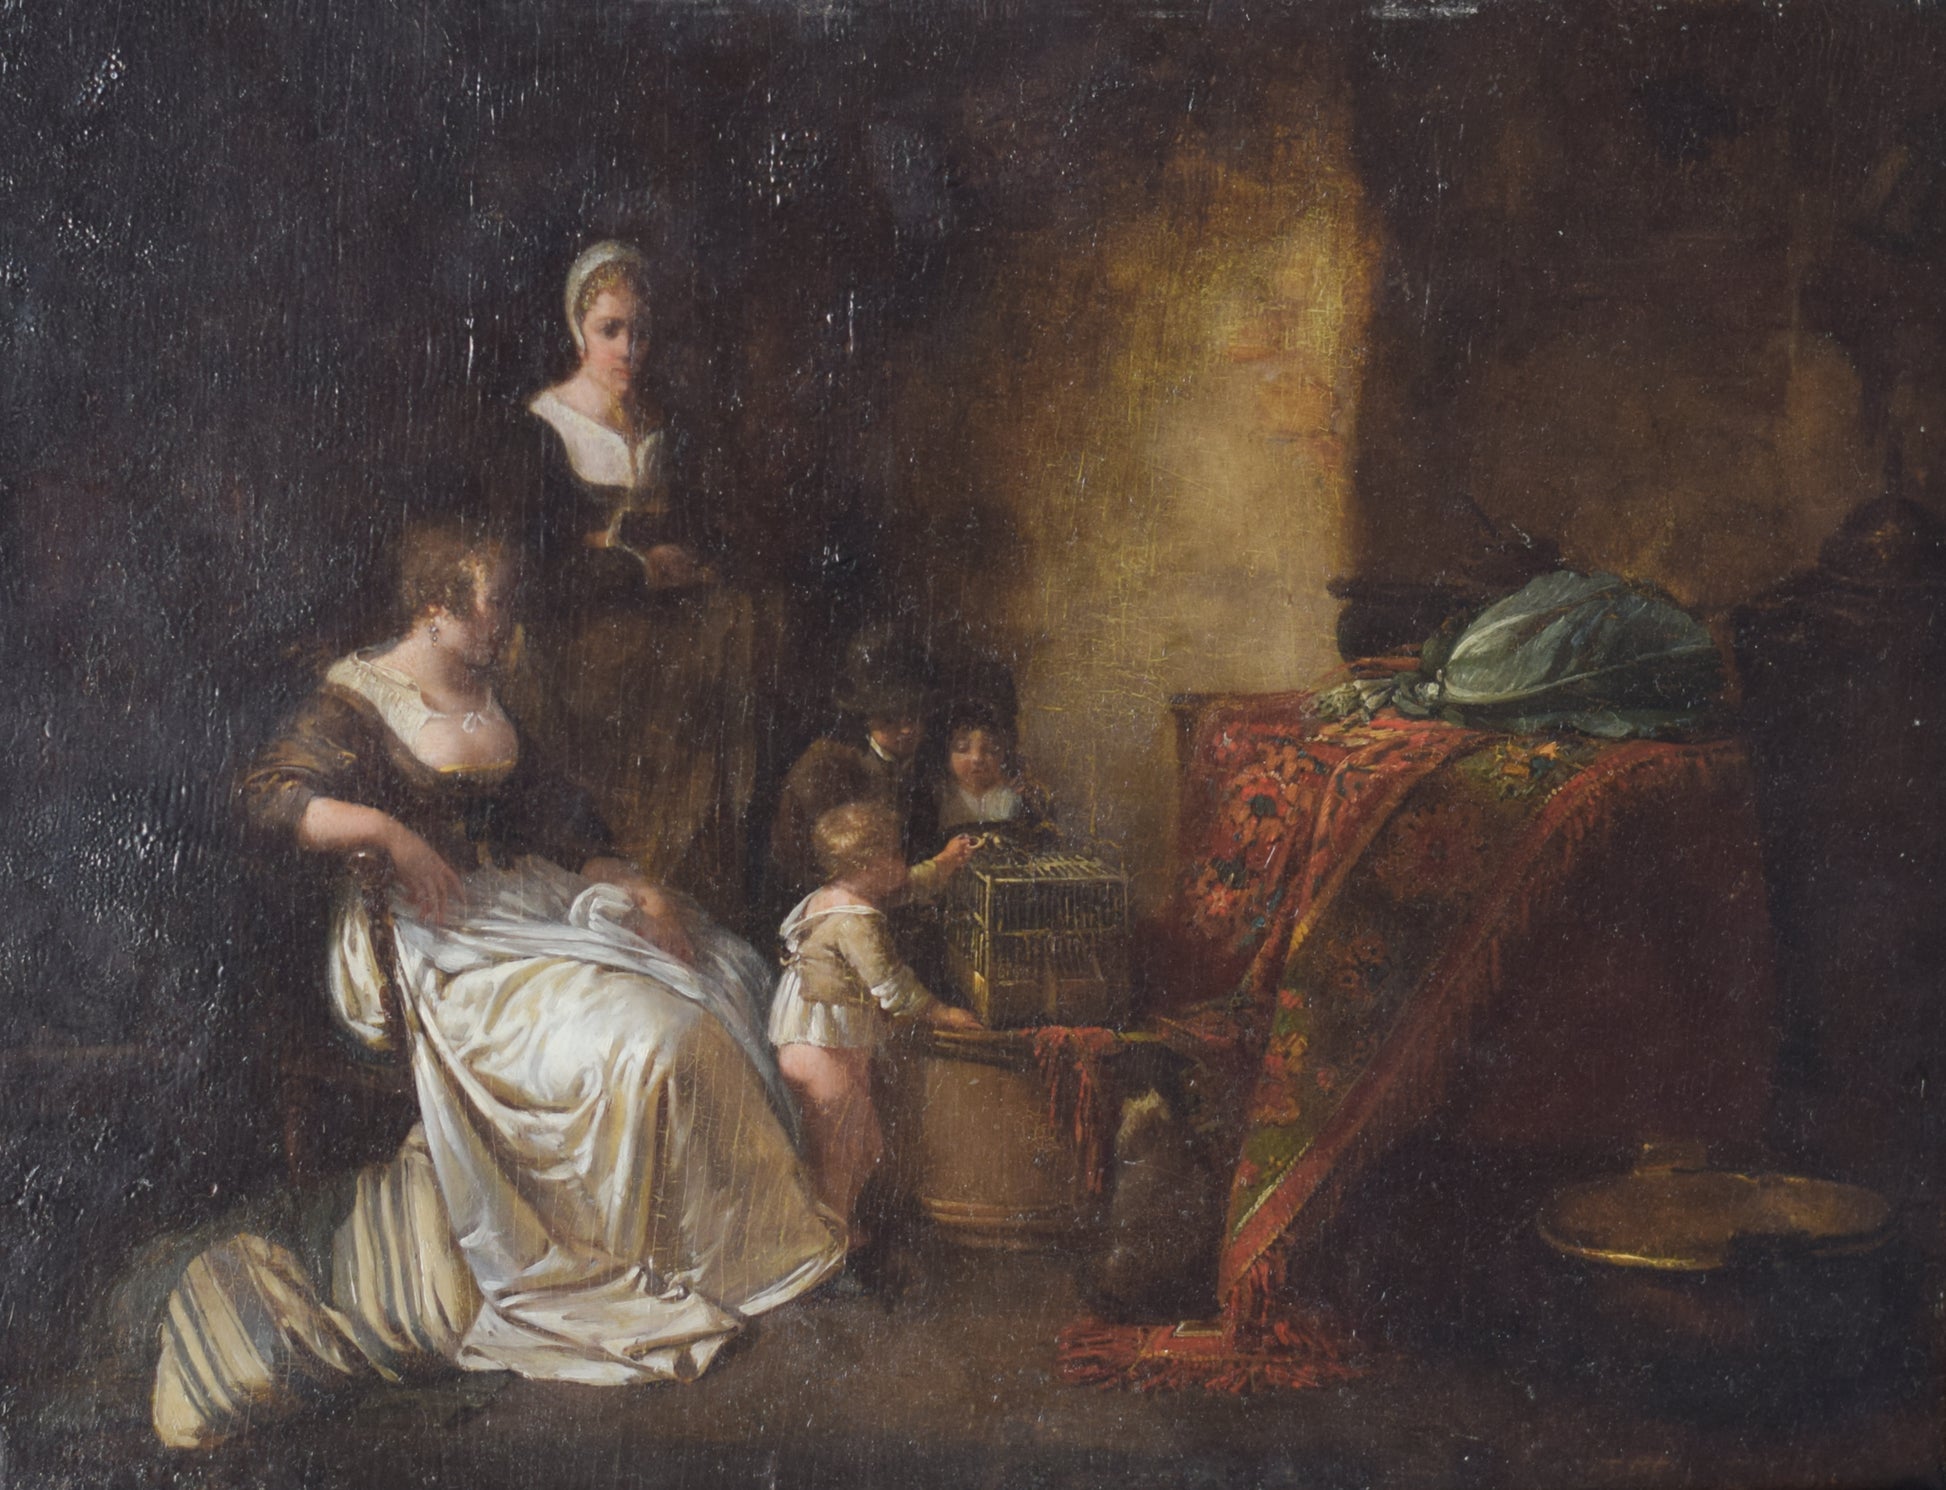 Late 18th Century Domestic scene with children feeding a bird in a cage with mother and maid.